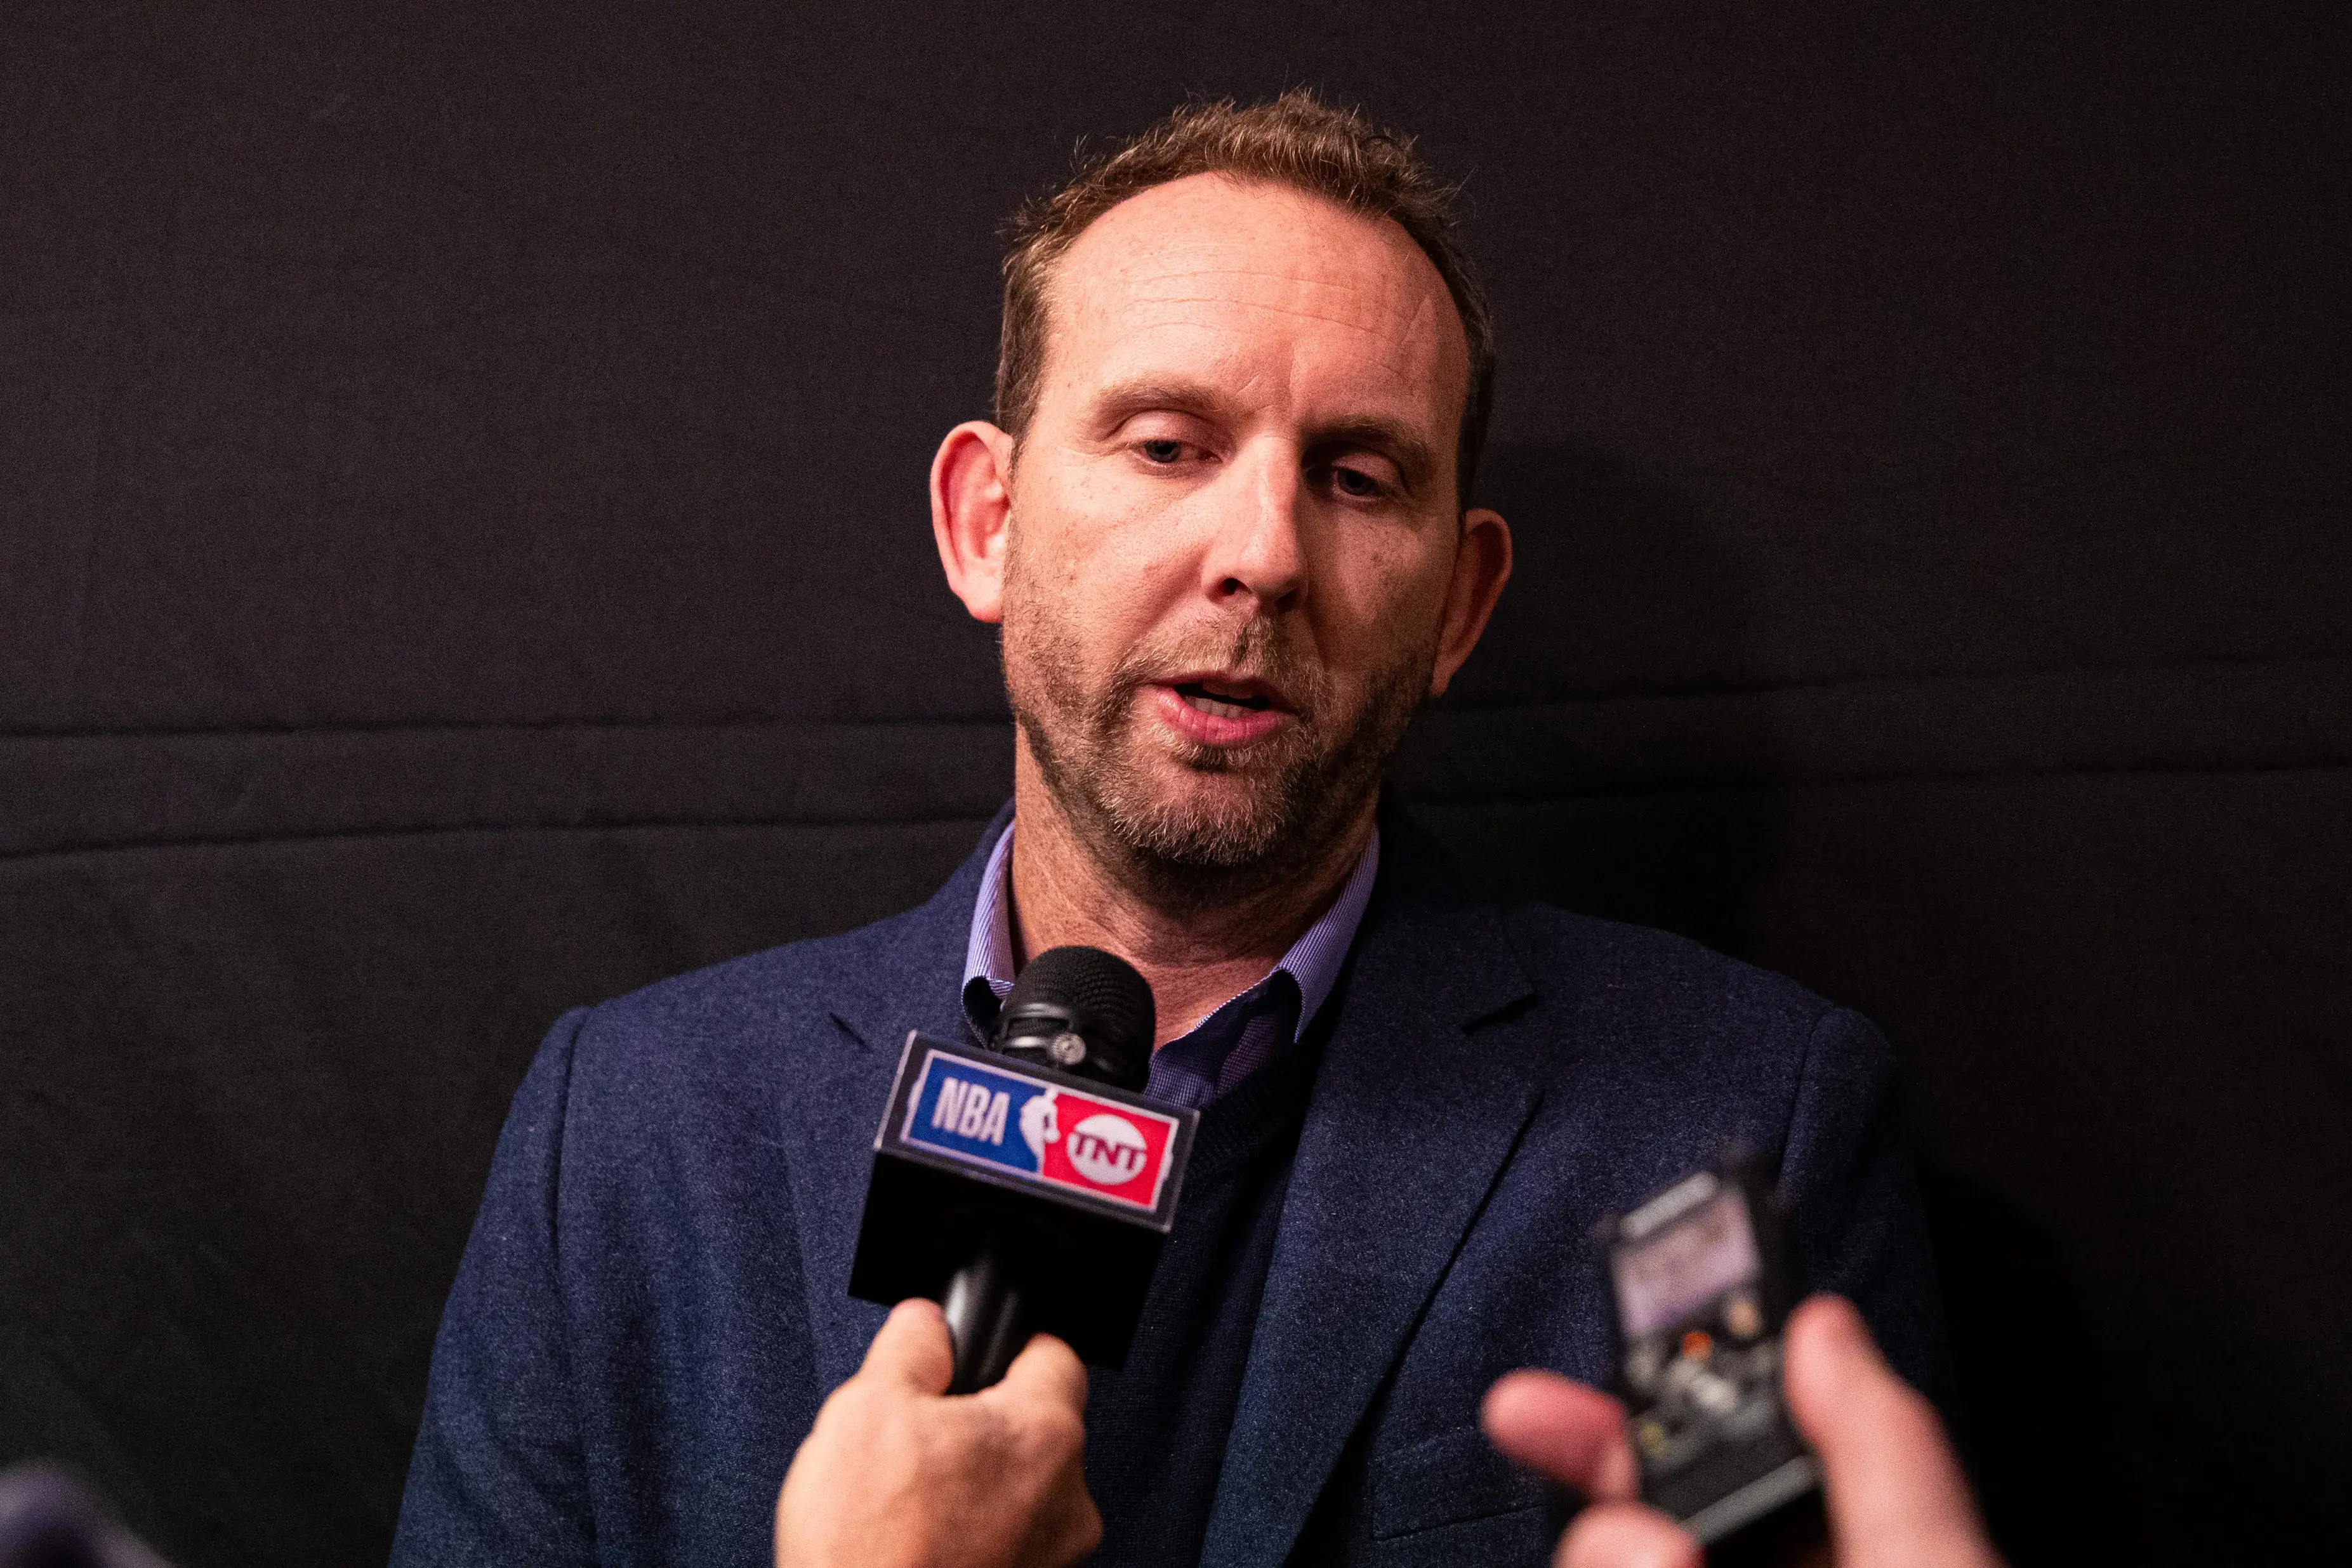 Feb 20, 2020; Philadelphia, Pennsylvania, USA; Brooklyn Nets general manager Sean Marks speaks with the media about the injury status of Kyrie Irving (not pictured) before a game against the Philadelphia 76ers at Wells Fargo Center. / Bill Streicher-USA TODAY Sports